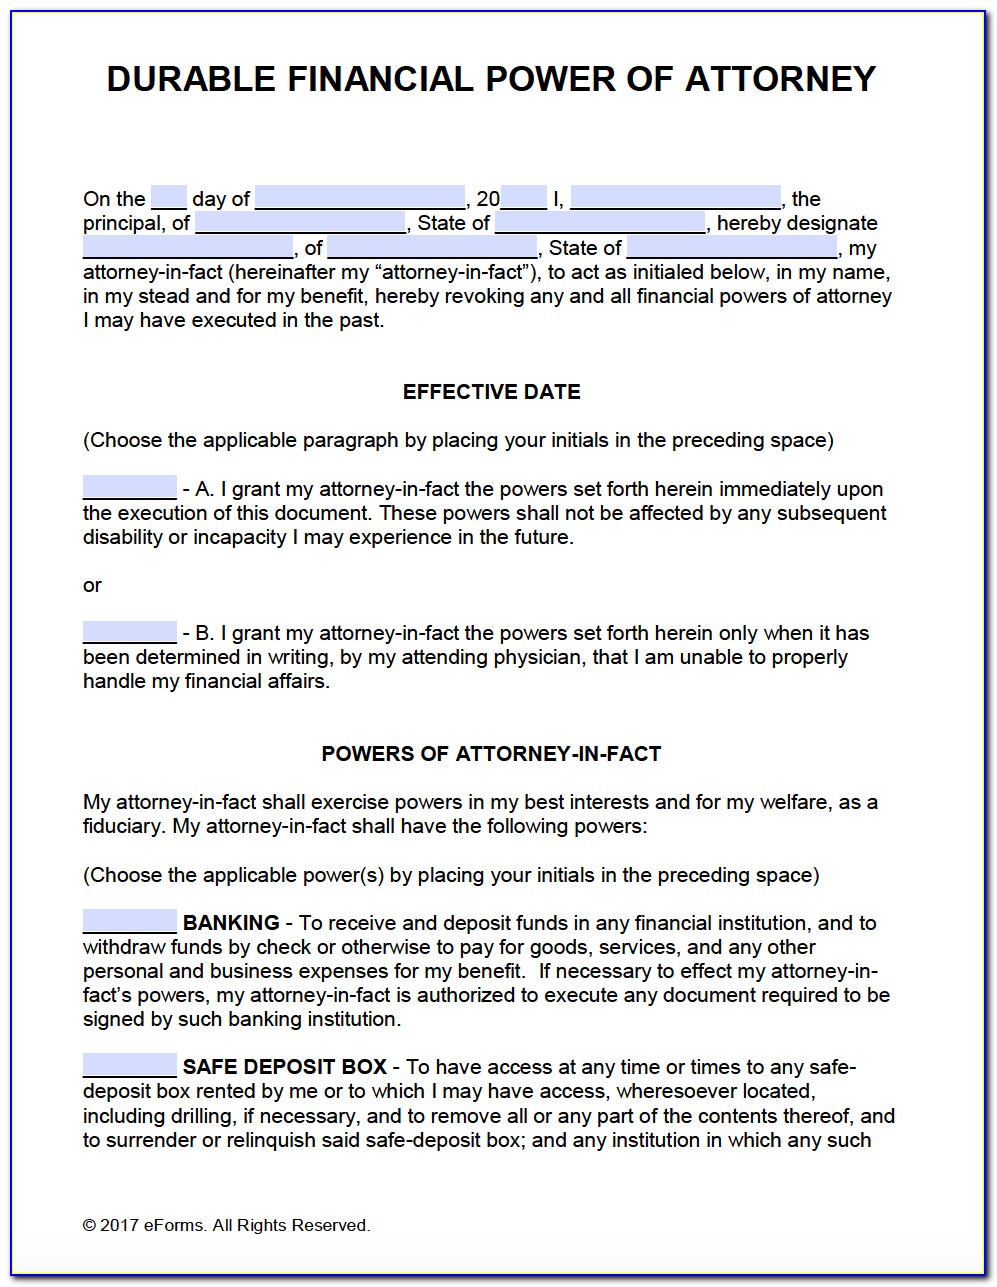 Durable Power Of Attorney Form Free Printable